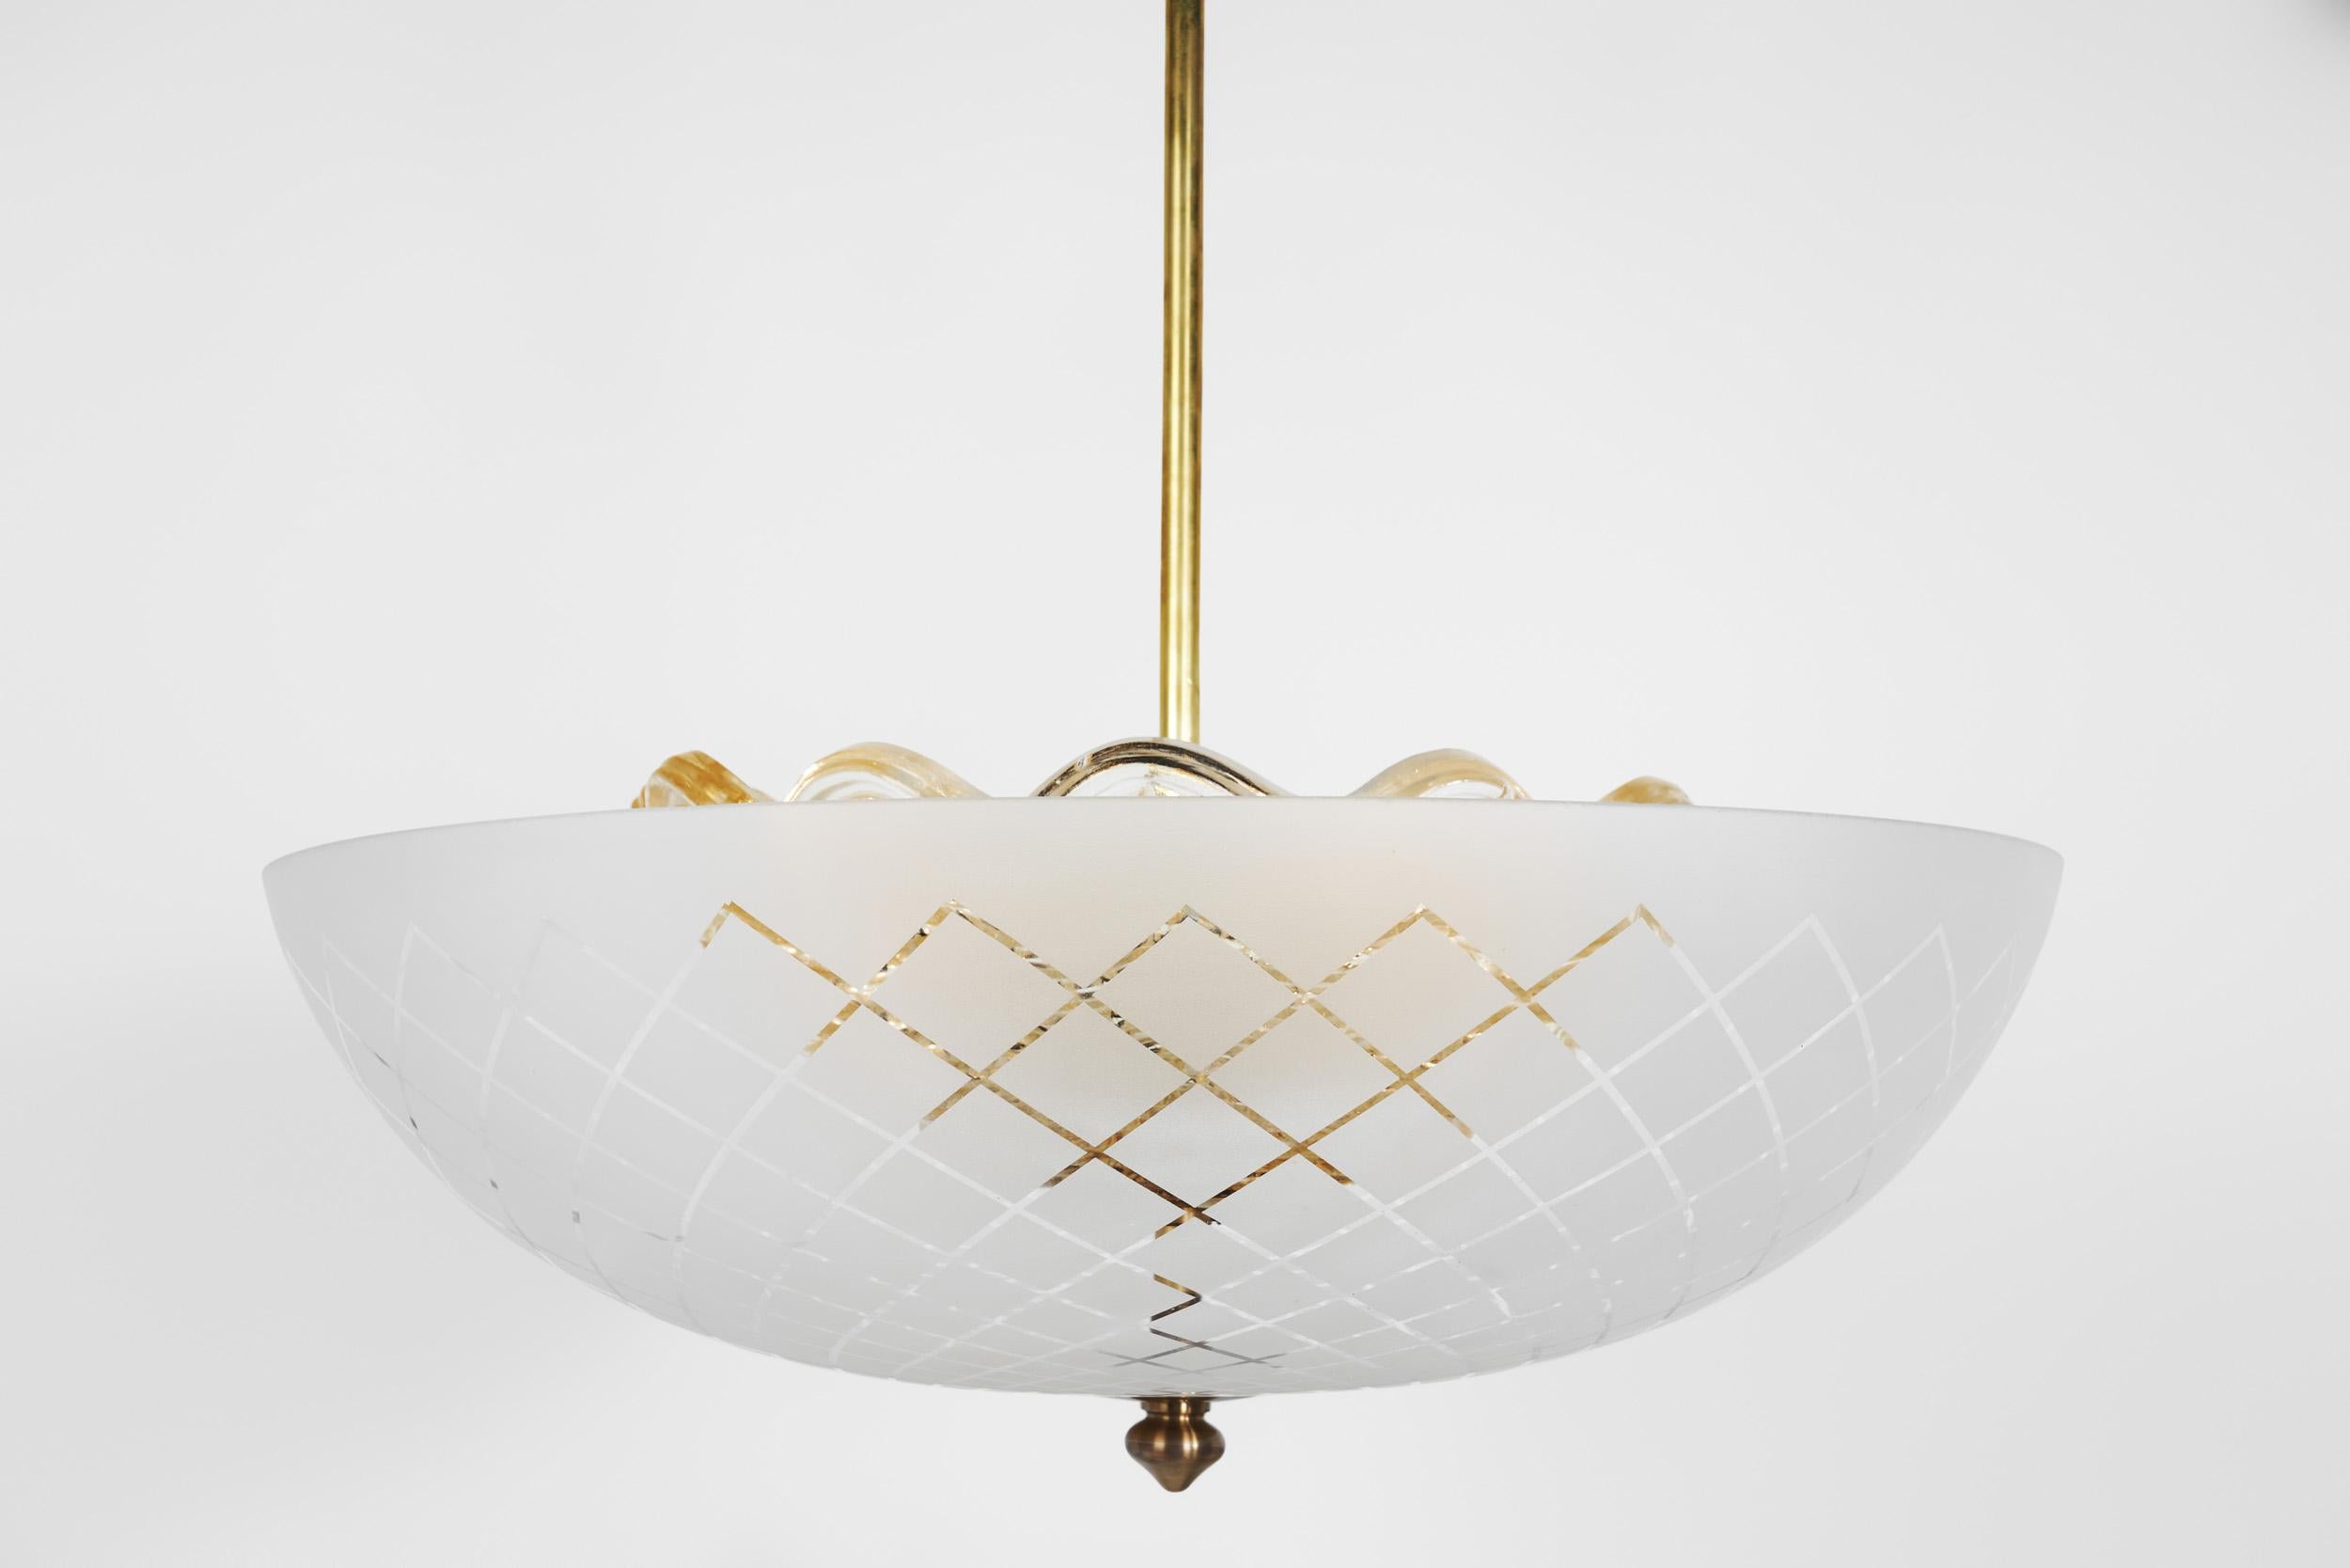 Swedish Modern Glass Ceiling Lamp by Orrefors, Sweden 1930s For Sale 3